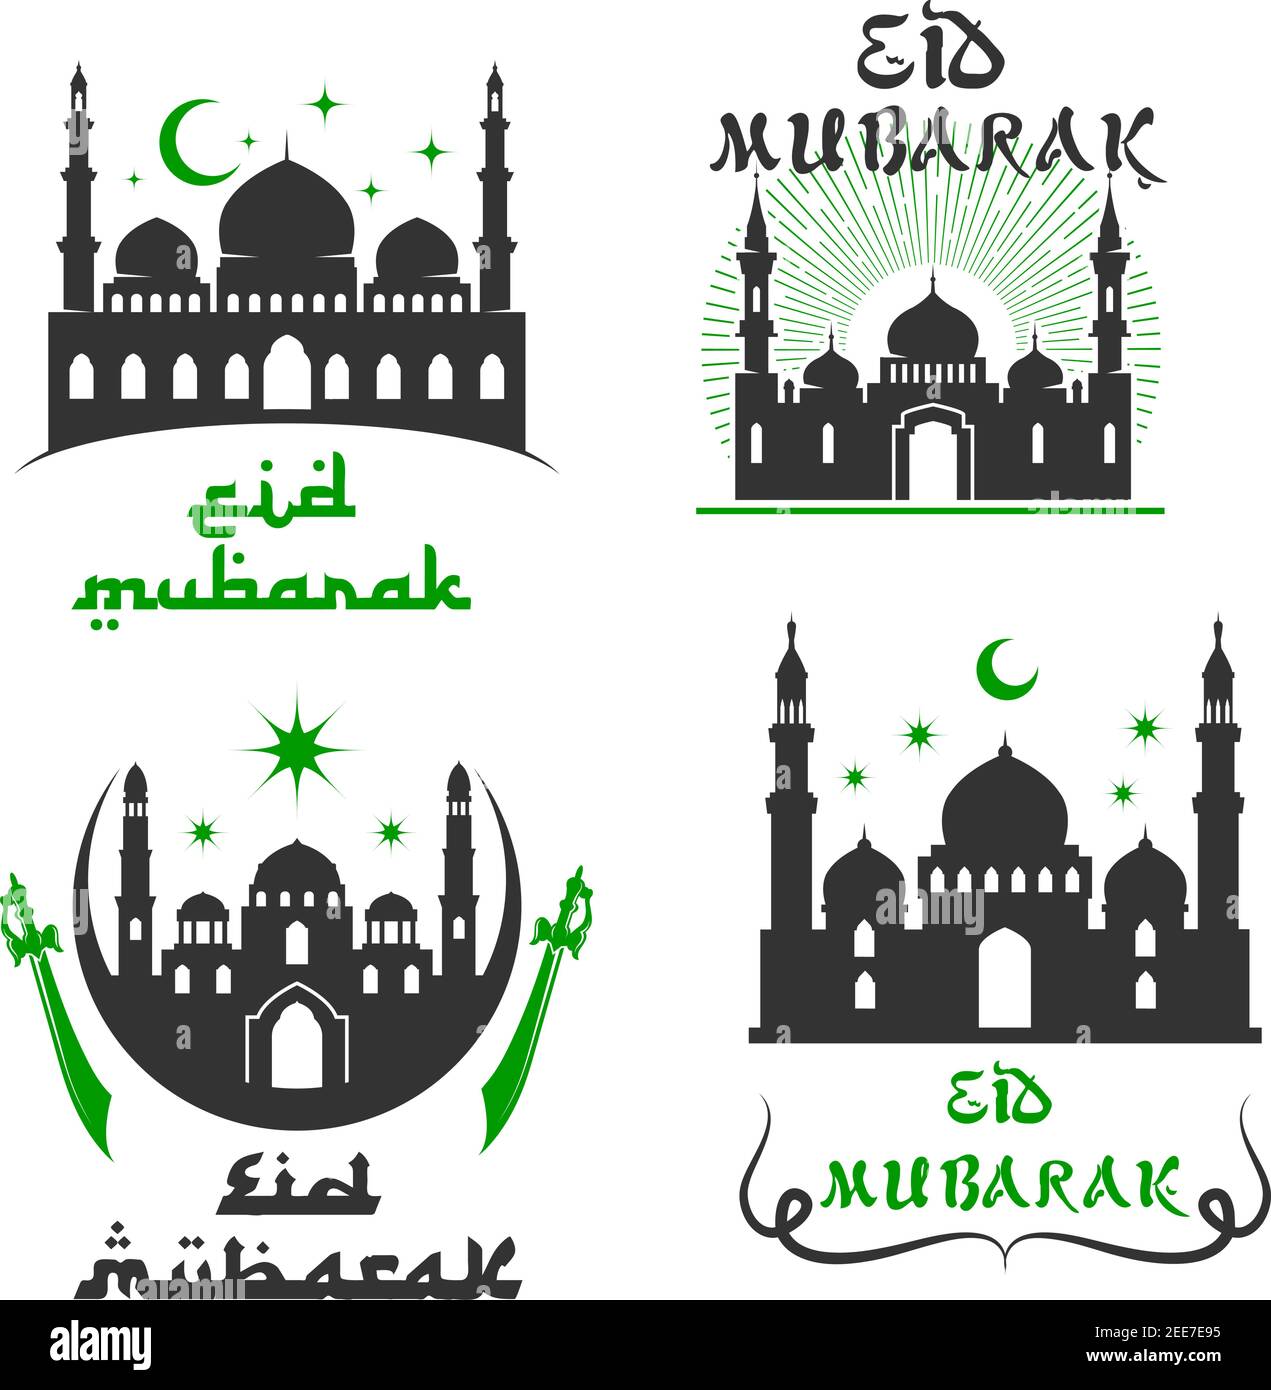 Eid Mubarak greetings set of mosque, crescent moon and twinkling star, swords or sabers and Arabic calligraphy for Islamic or Muslim traditional relig Stock Vector